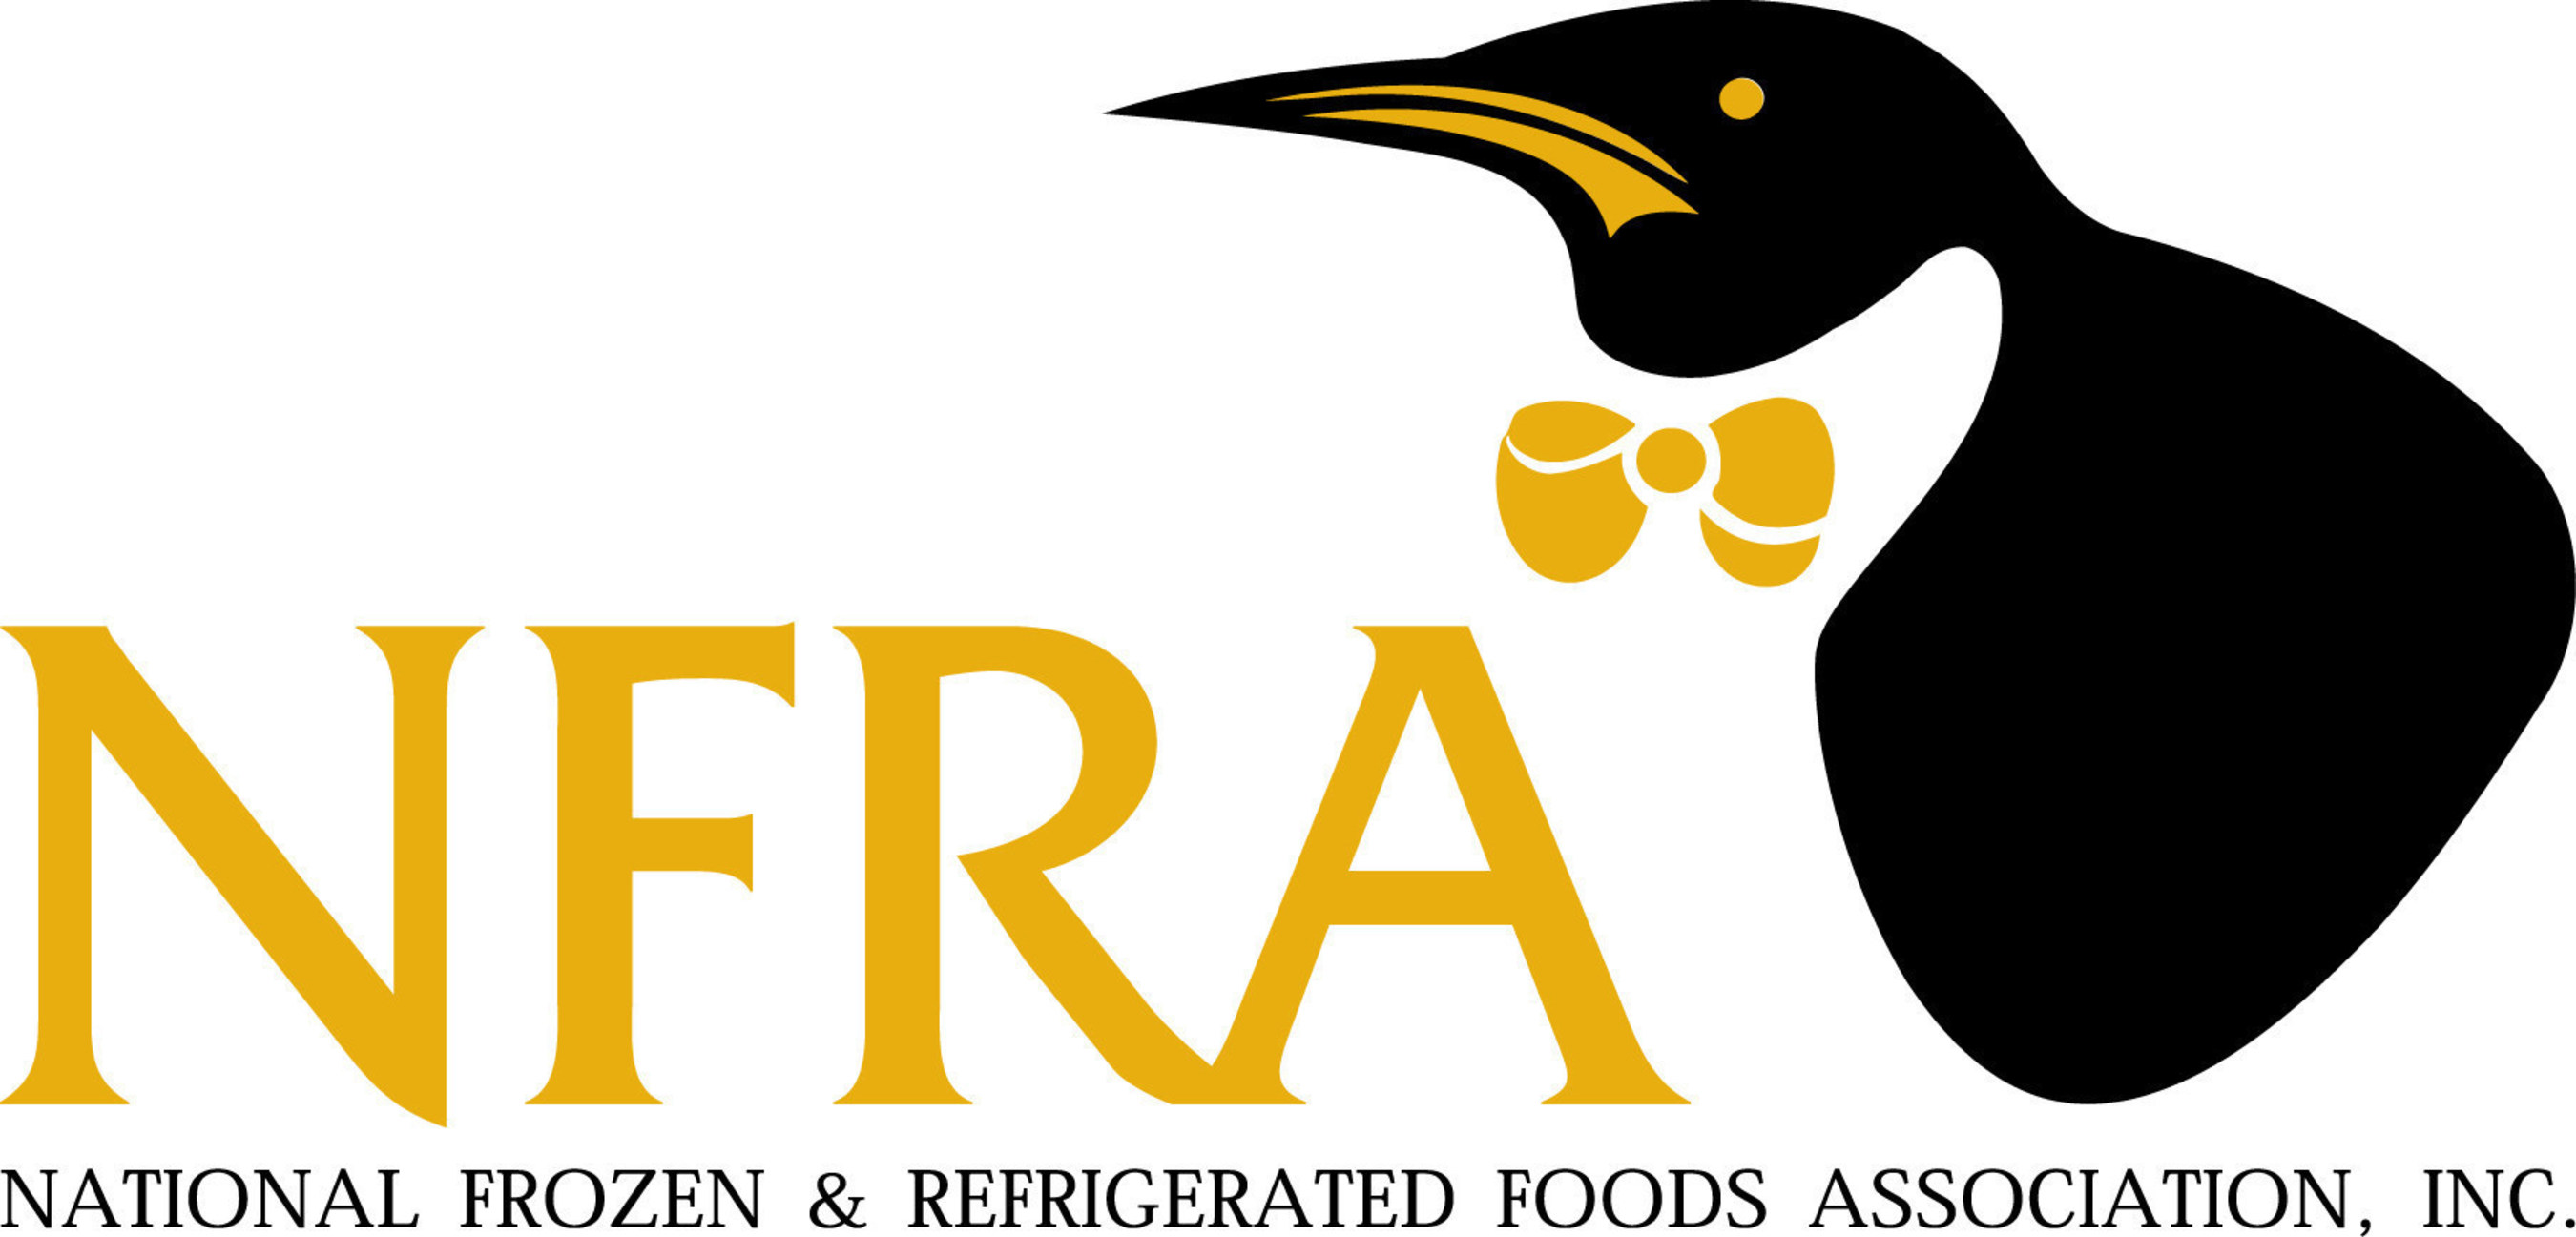 The National Frozen & Refrigerated Foods Association